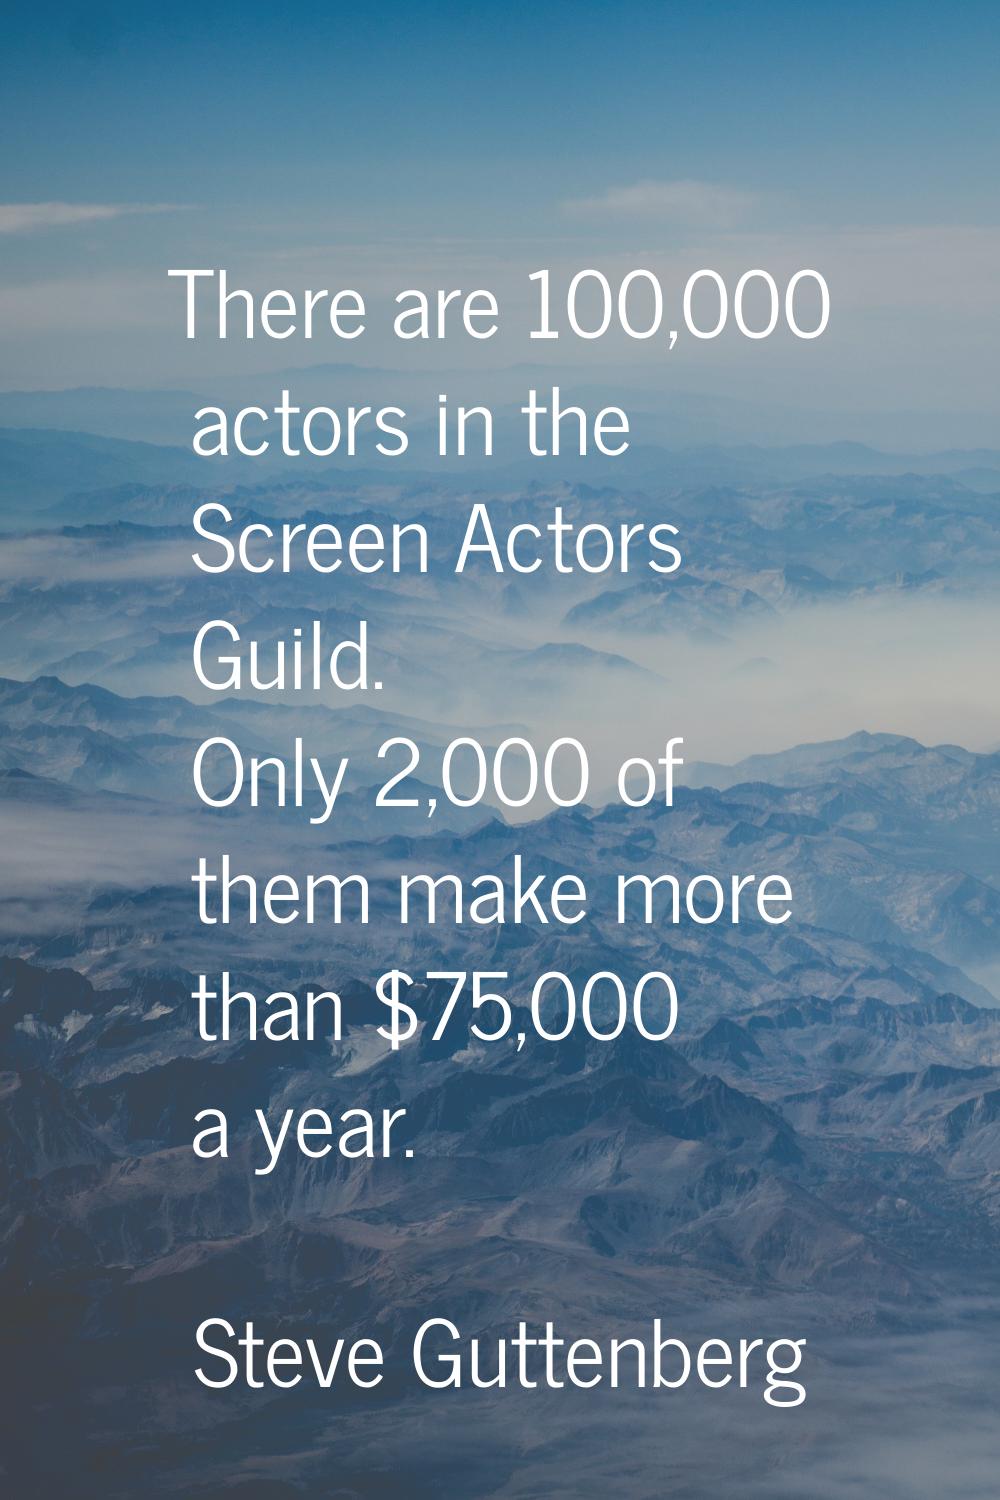 There are 100,000 actors in the Screen Actors Guild. Only 2,000 of them make more than $75,000 a ye